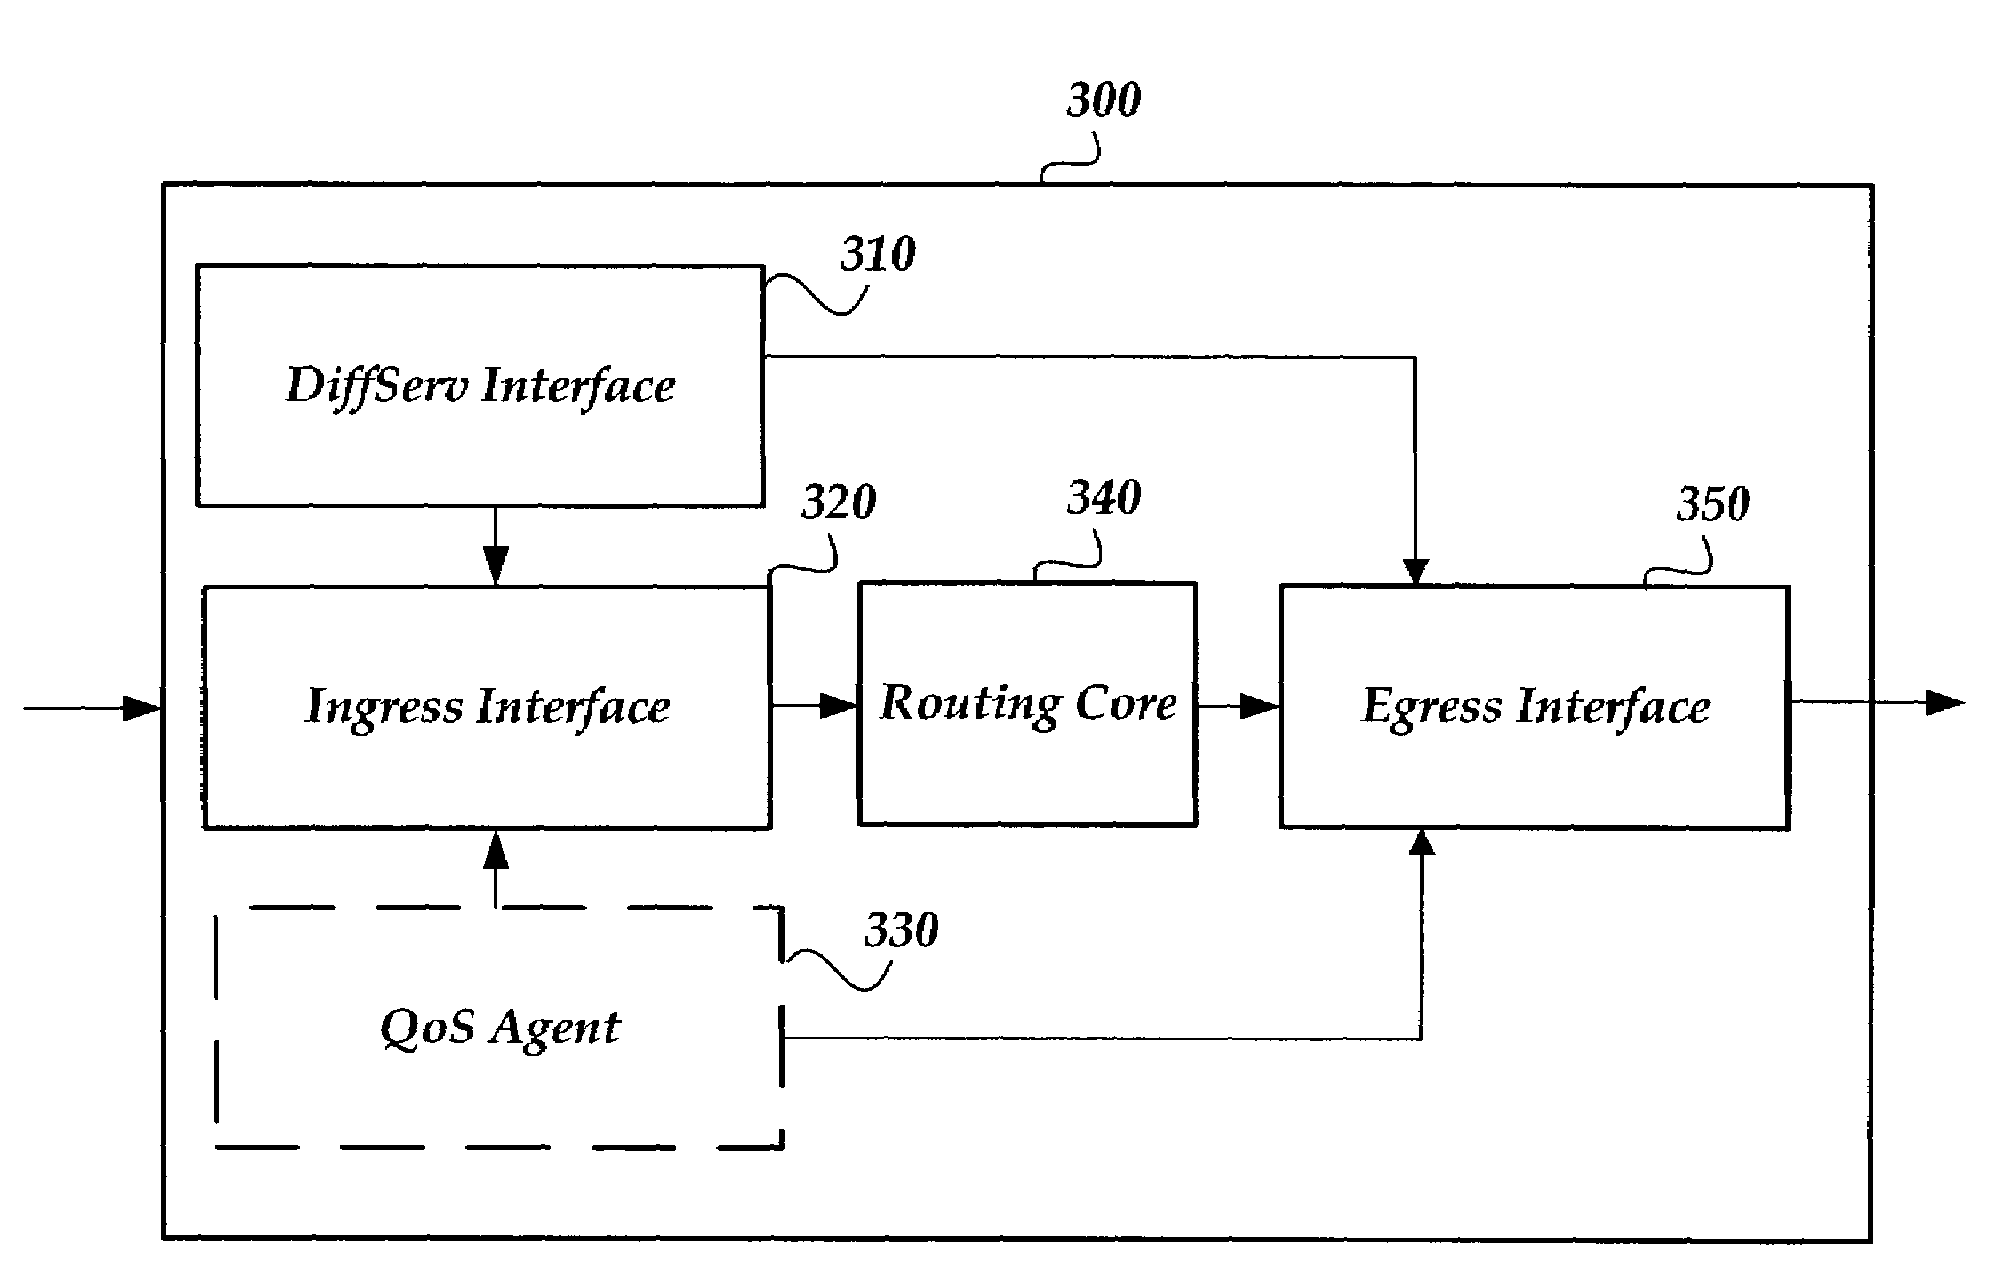 Multimode queuing system for DiffServ routers